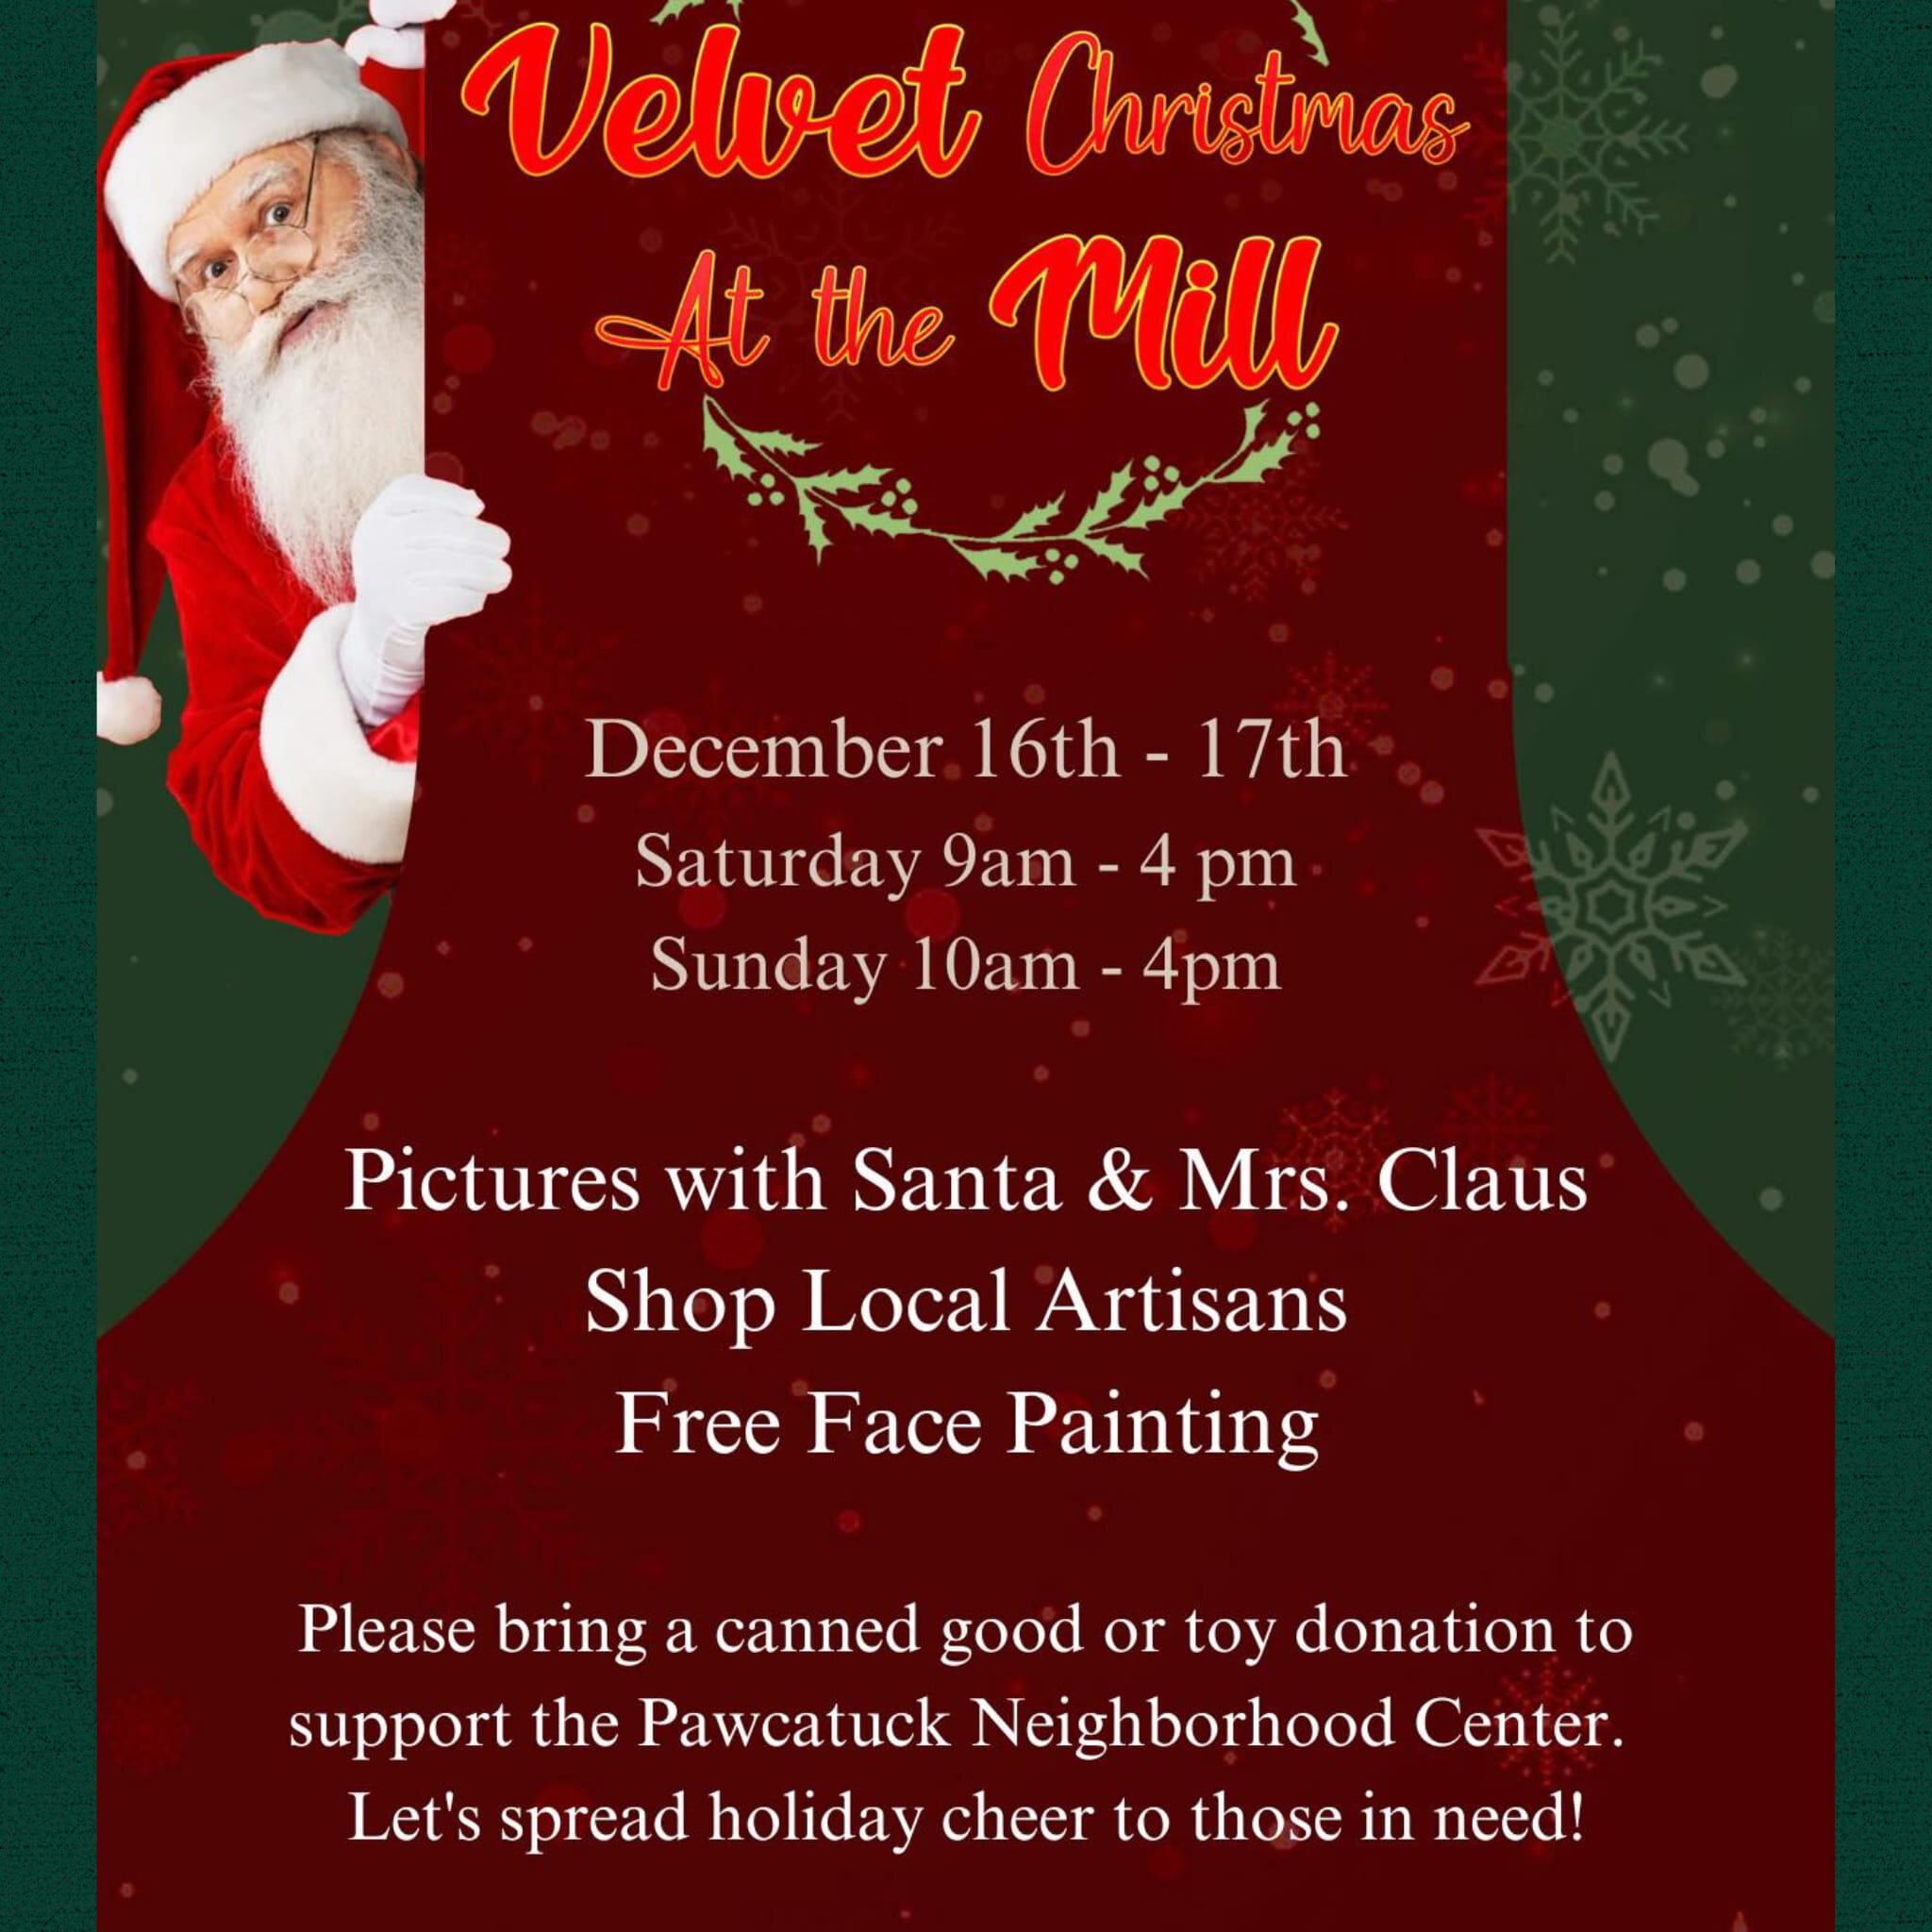 Experience the enchantment of the holiday season at @@the_velvetmill! This Saturday 12/16 and Sunday 12/17, explore a charming holiday market filled with a curated selection of gifts, crafts, and seasonal delights. Meet and greet Santa and Mrs. Claus